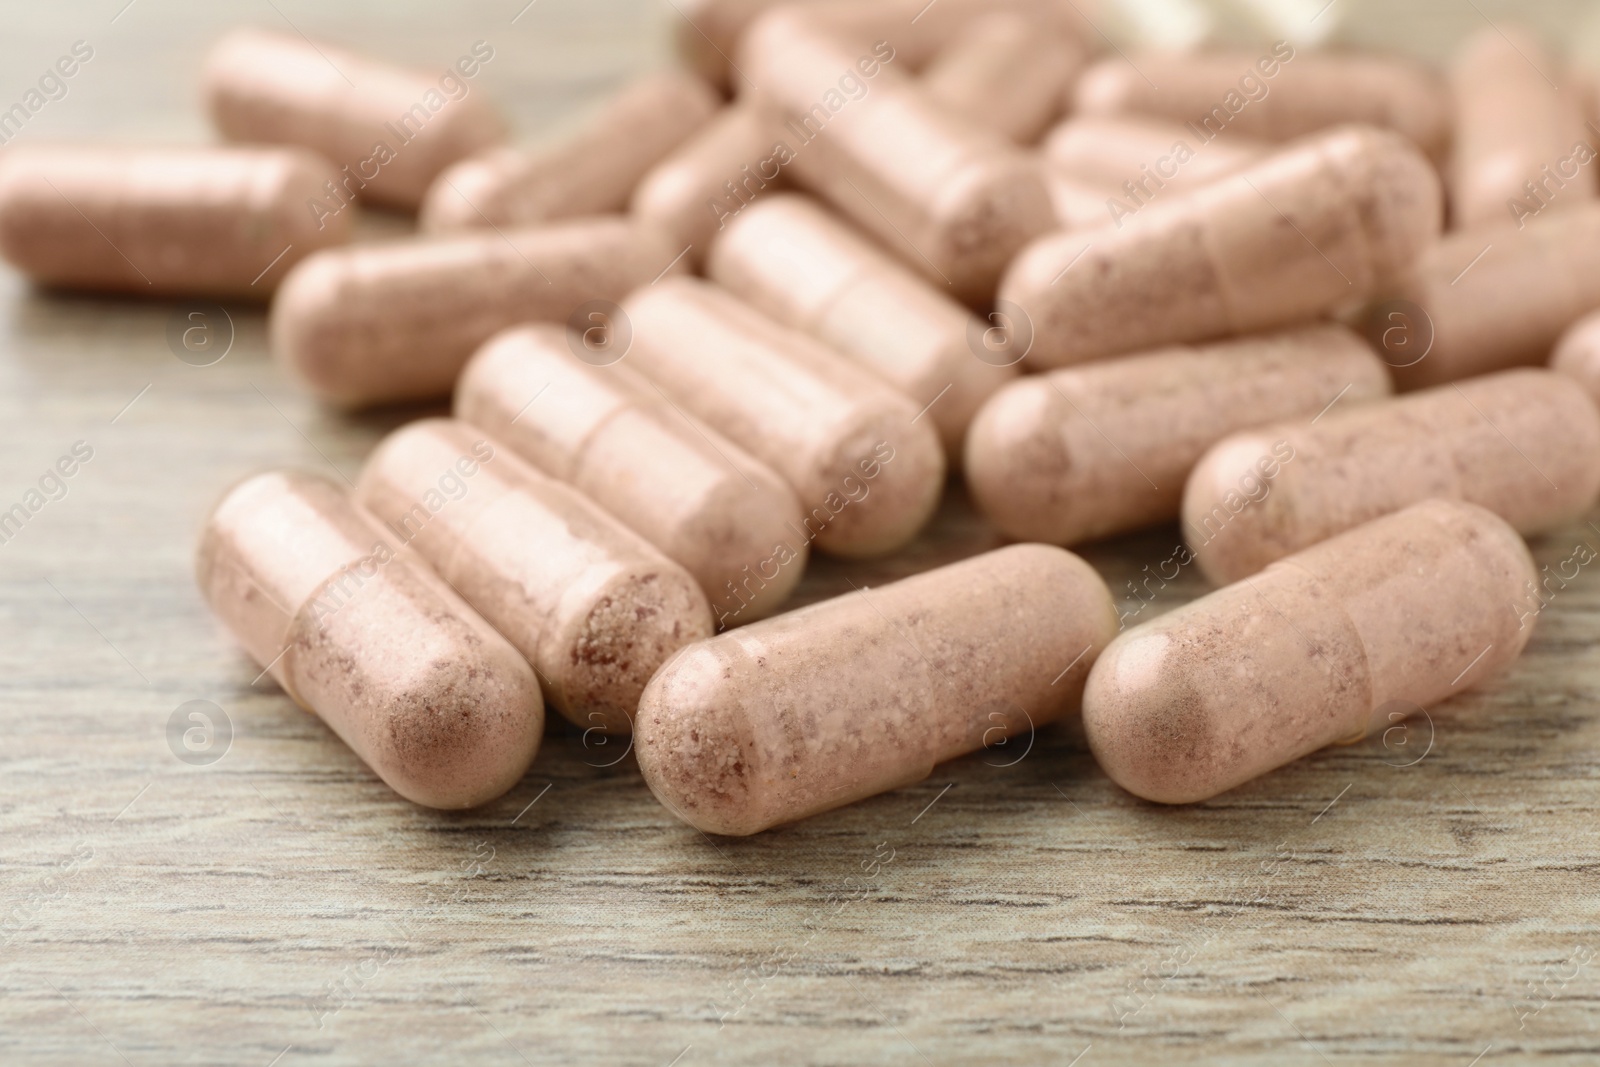 Photo of Gelatin capsules on wooden table, closeup view